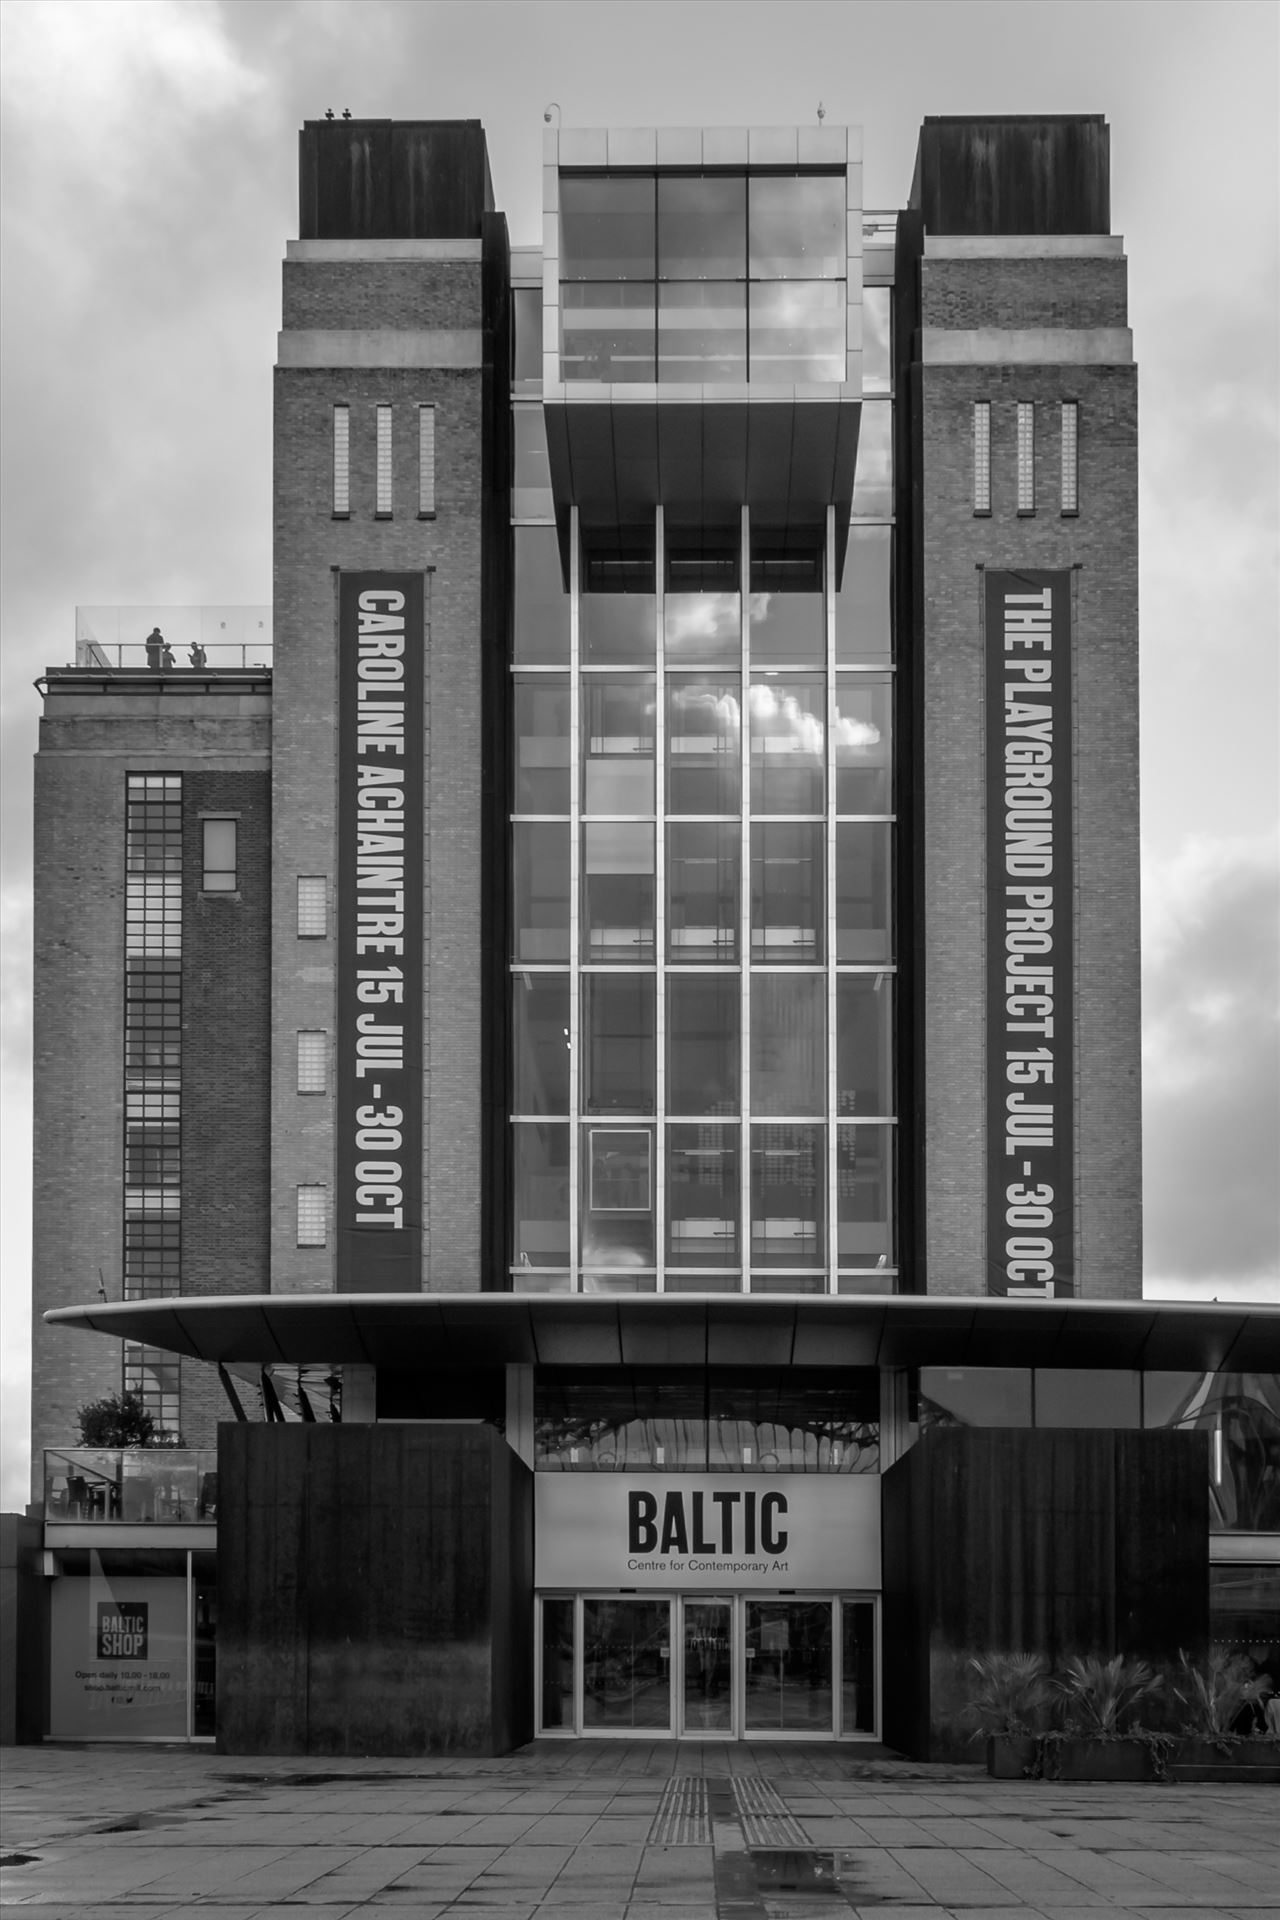 Baltic Centre for Contemporary Art, Gateshead Housed in the Landmark, J R Rank Flour Mill building, its a major International centre for contemporary art. 2,600 square metres of art space, and boasts a rooftop restaurant with magnificent view of the River Tyne and Quayside. by Graham Dobson Photography